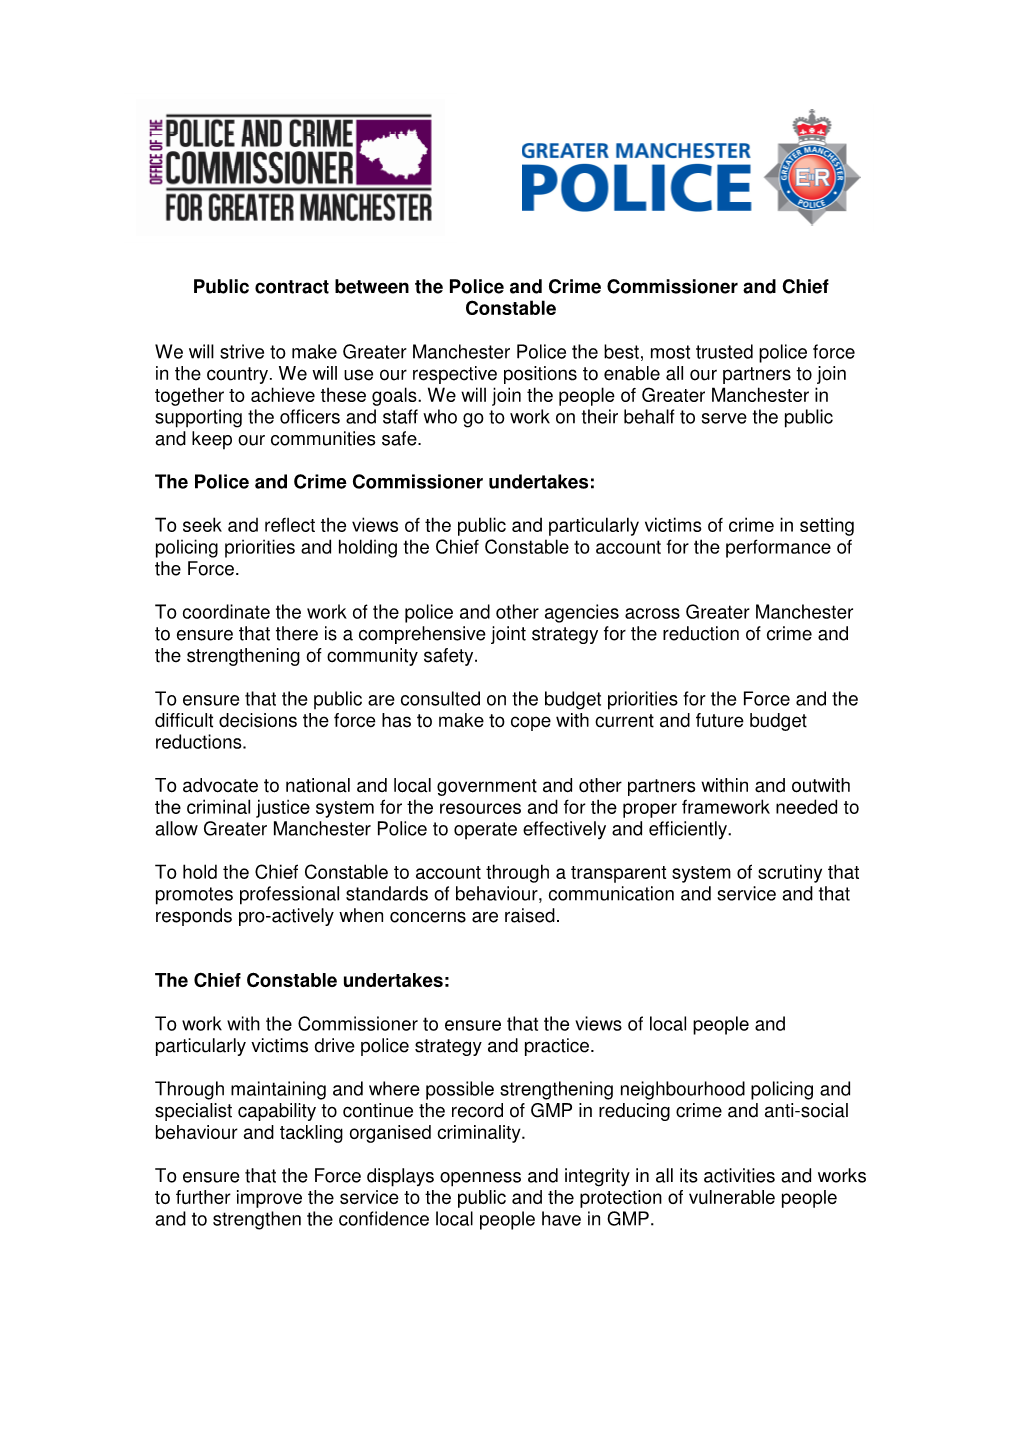 Public Contract Between the Police and Crime Commissioner and Chief Constable